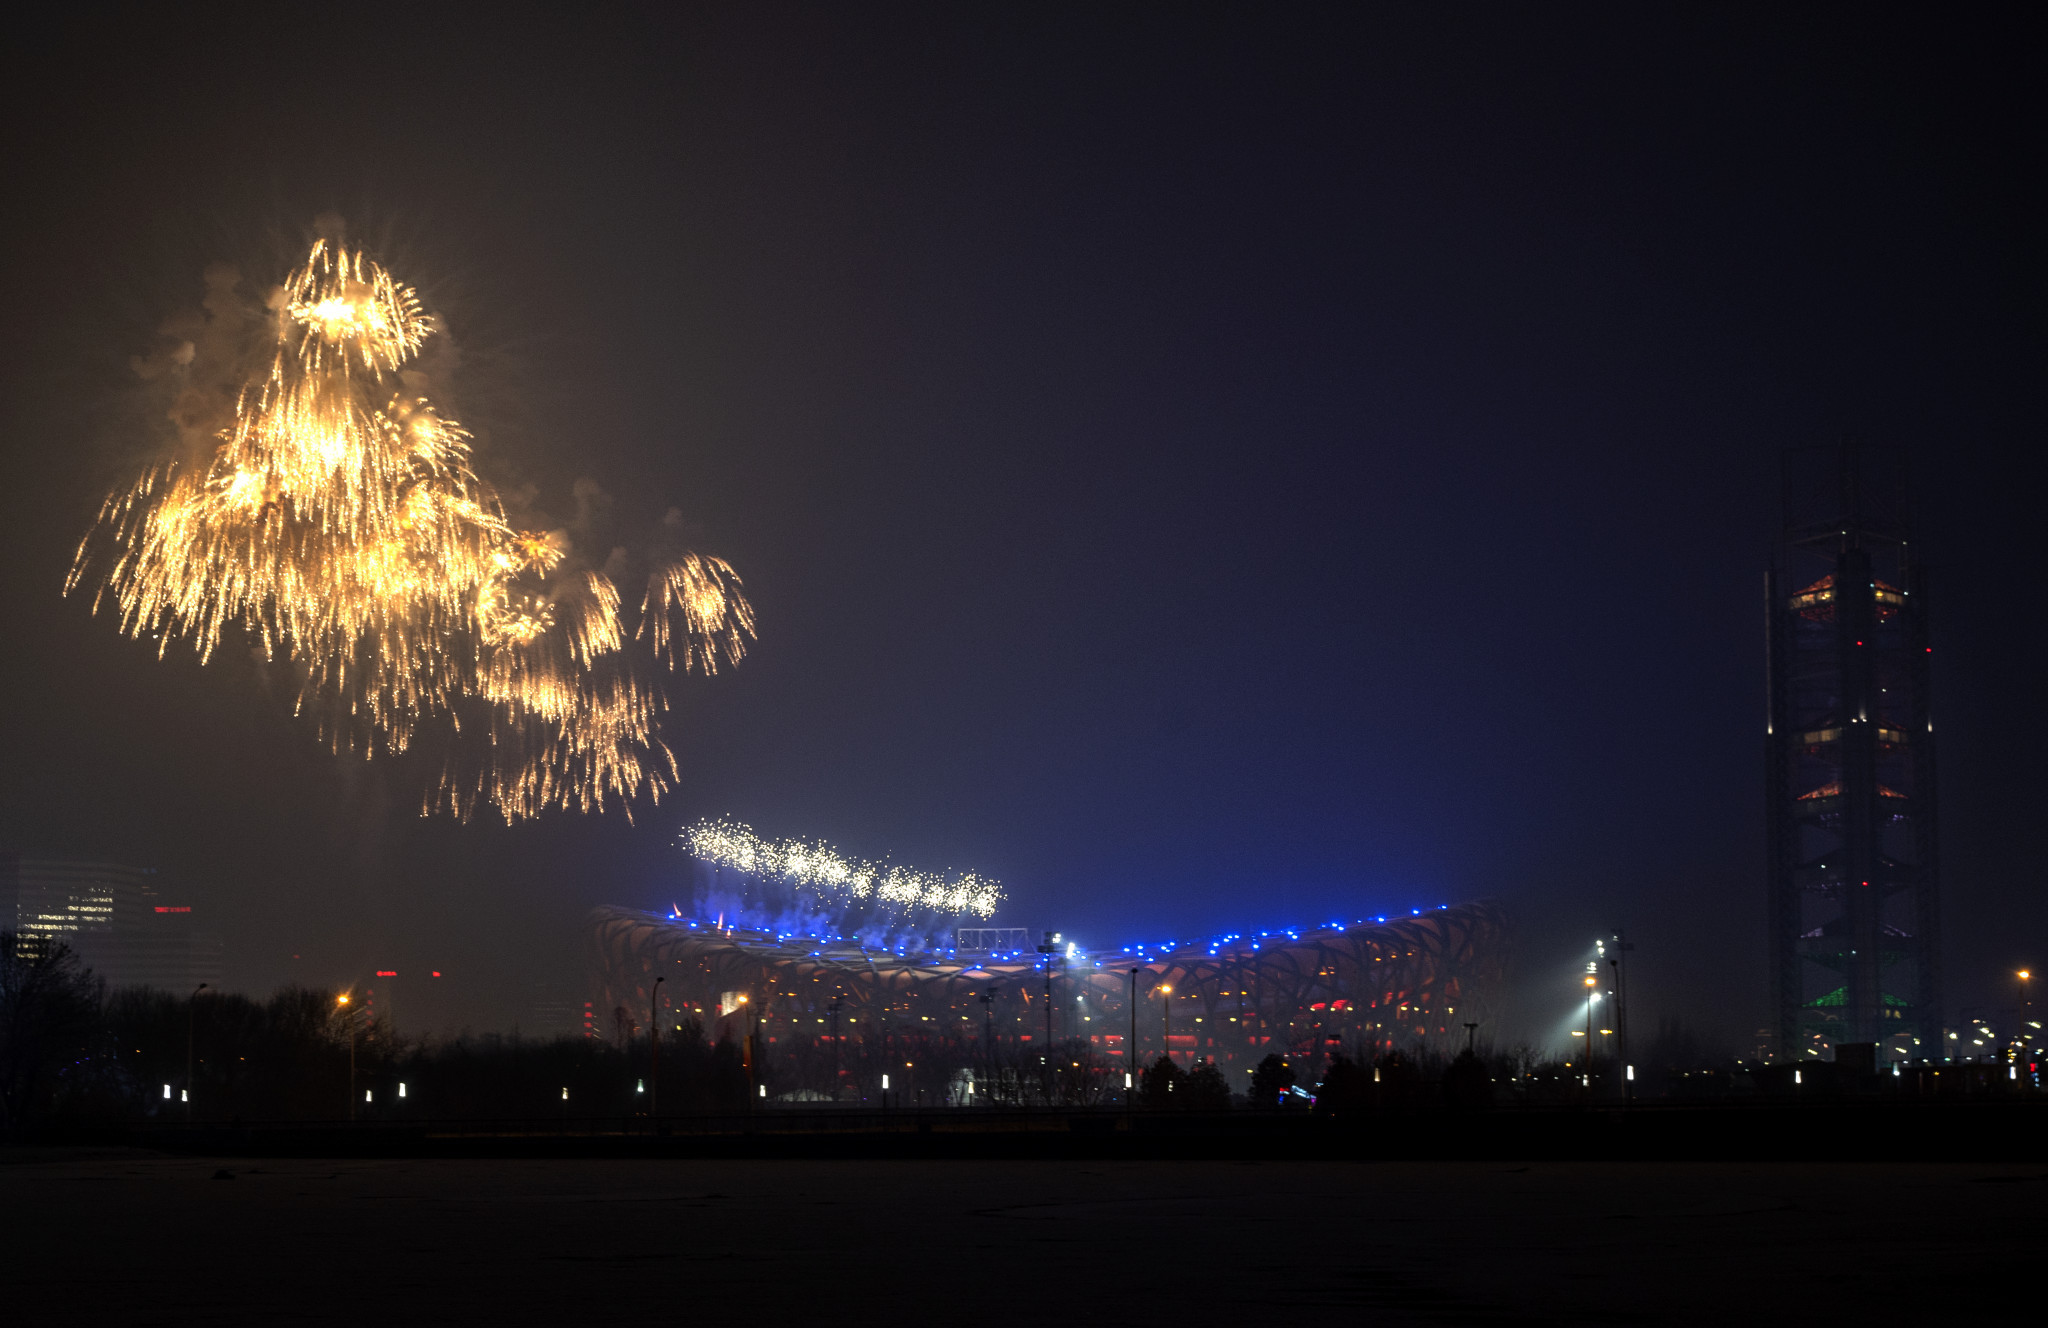 Beijing 2022 Opening Ceremony director Zhang Yimou has promised another spectacular event at the National Stadium ©Getty Images